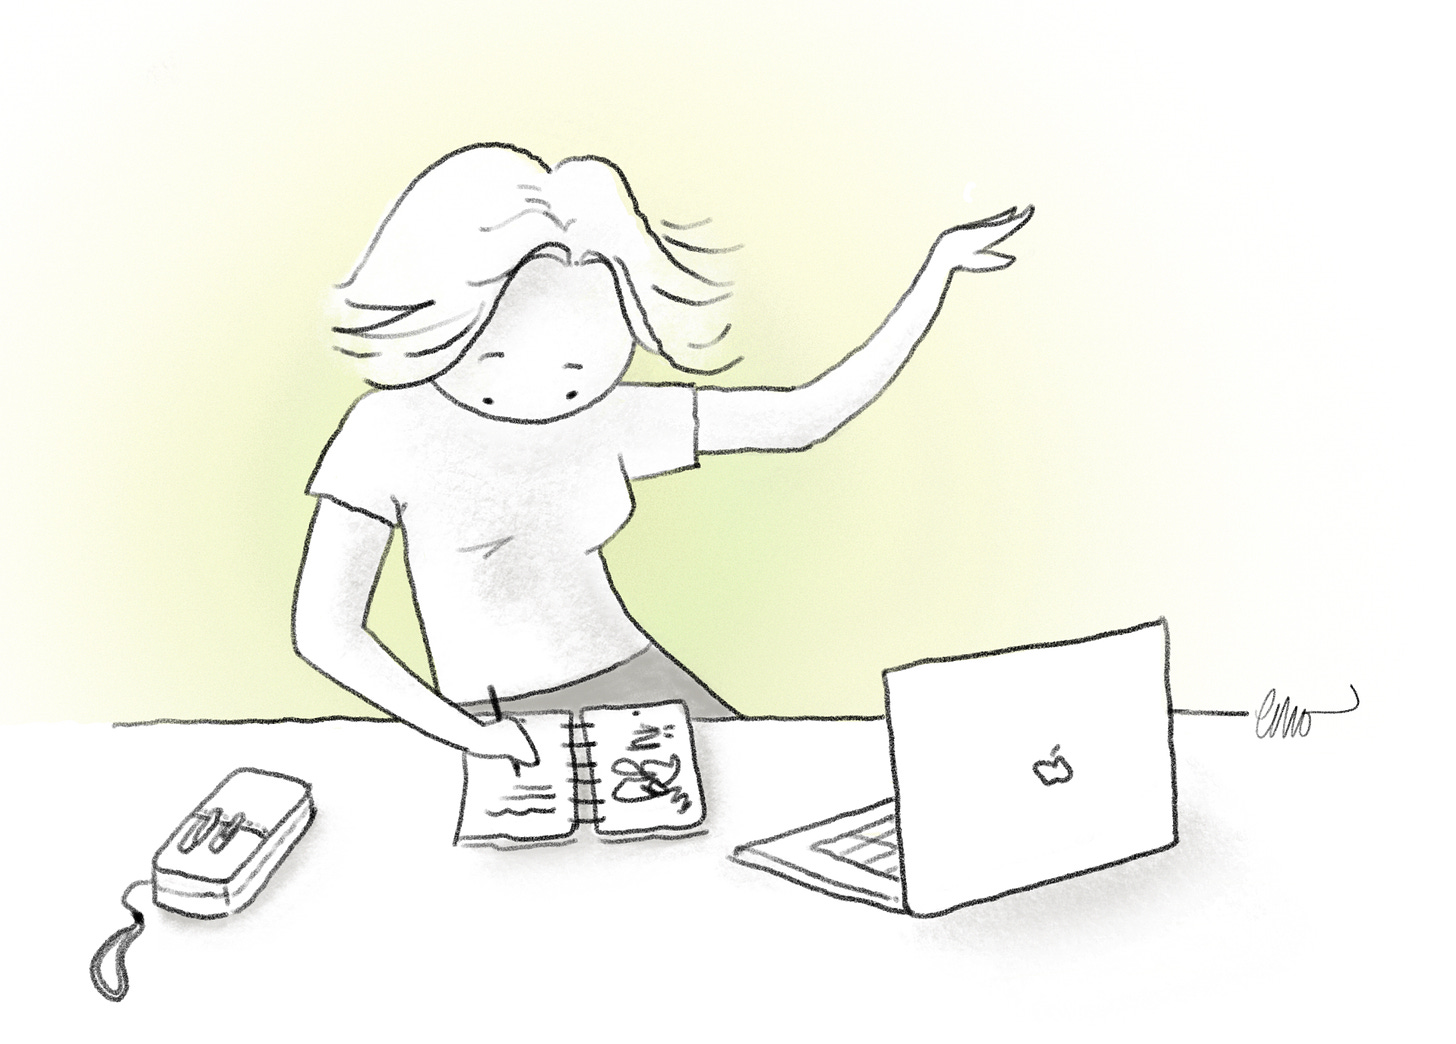 Digital cartoon pencil drawing of a woman standing at her desk, writing in a discbound notebook. A pencil case and an open Mac laptop are also on the desk.